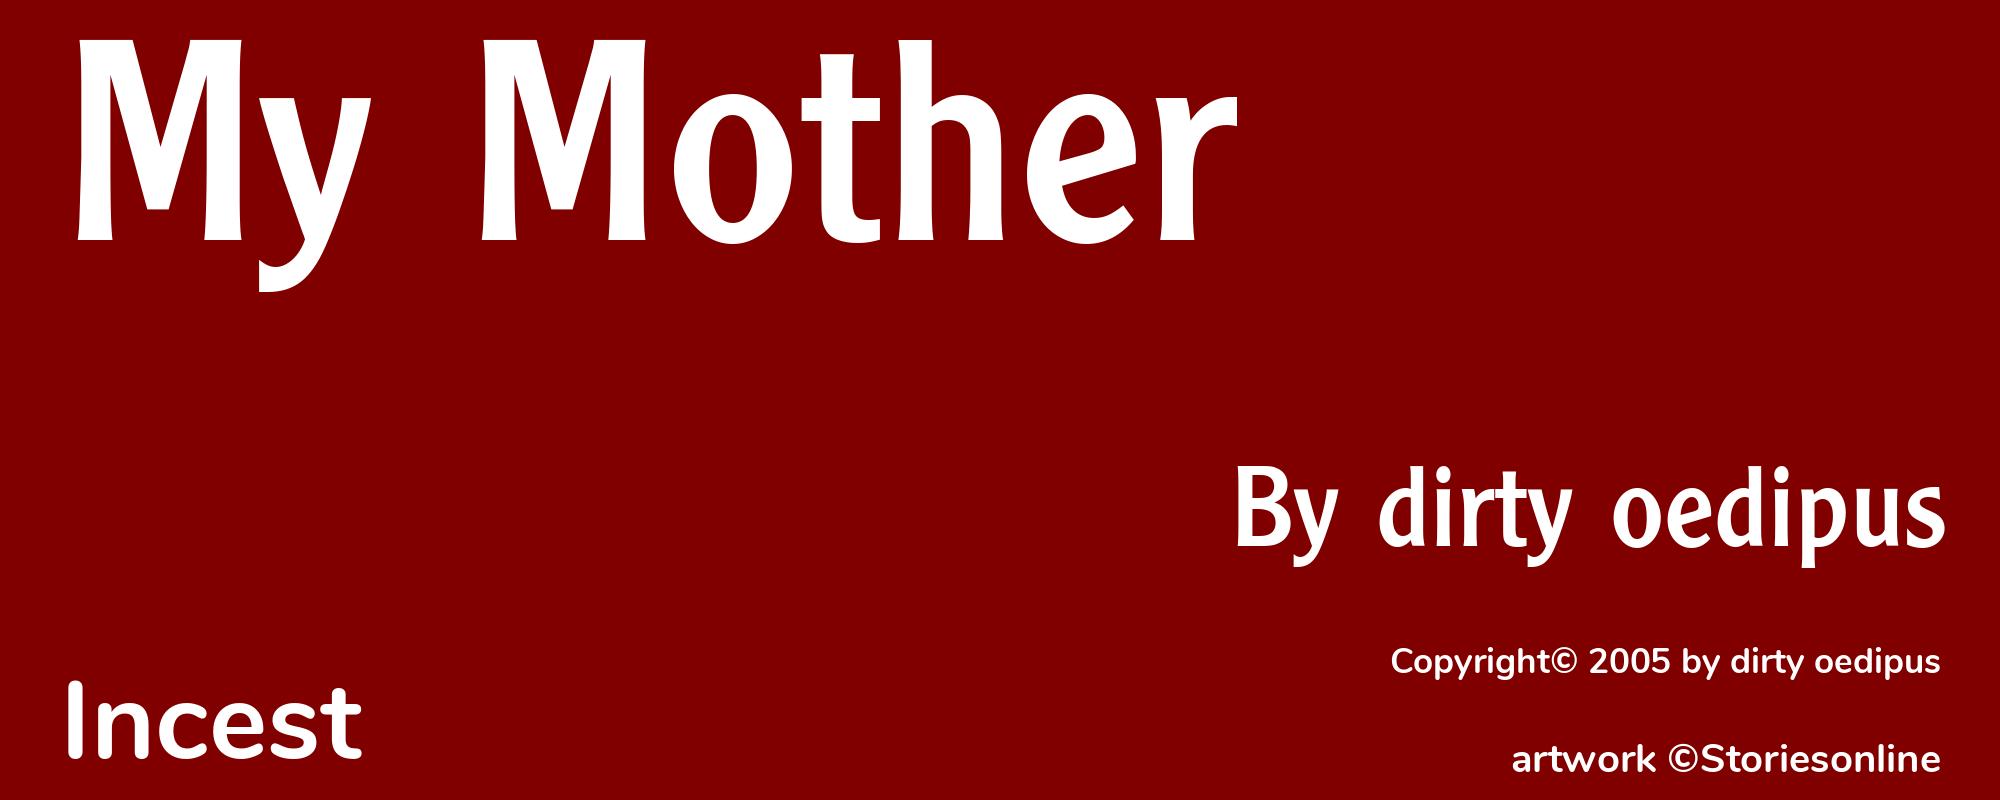 My Mother - Cover